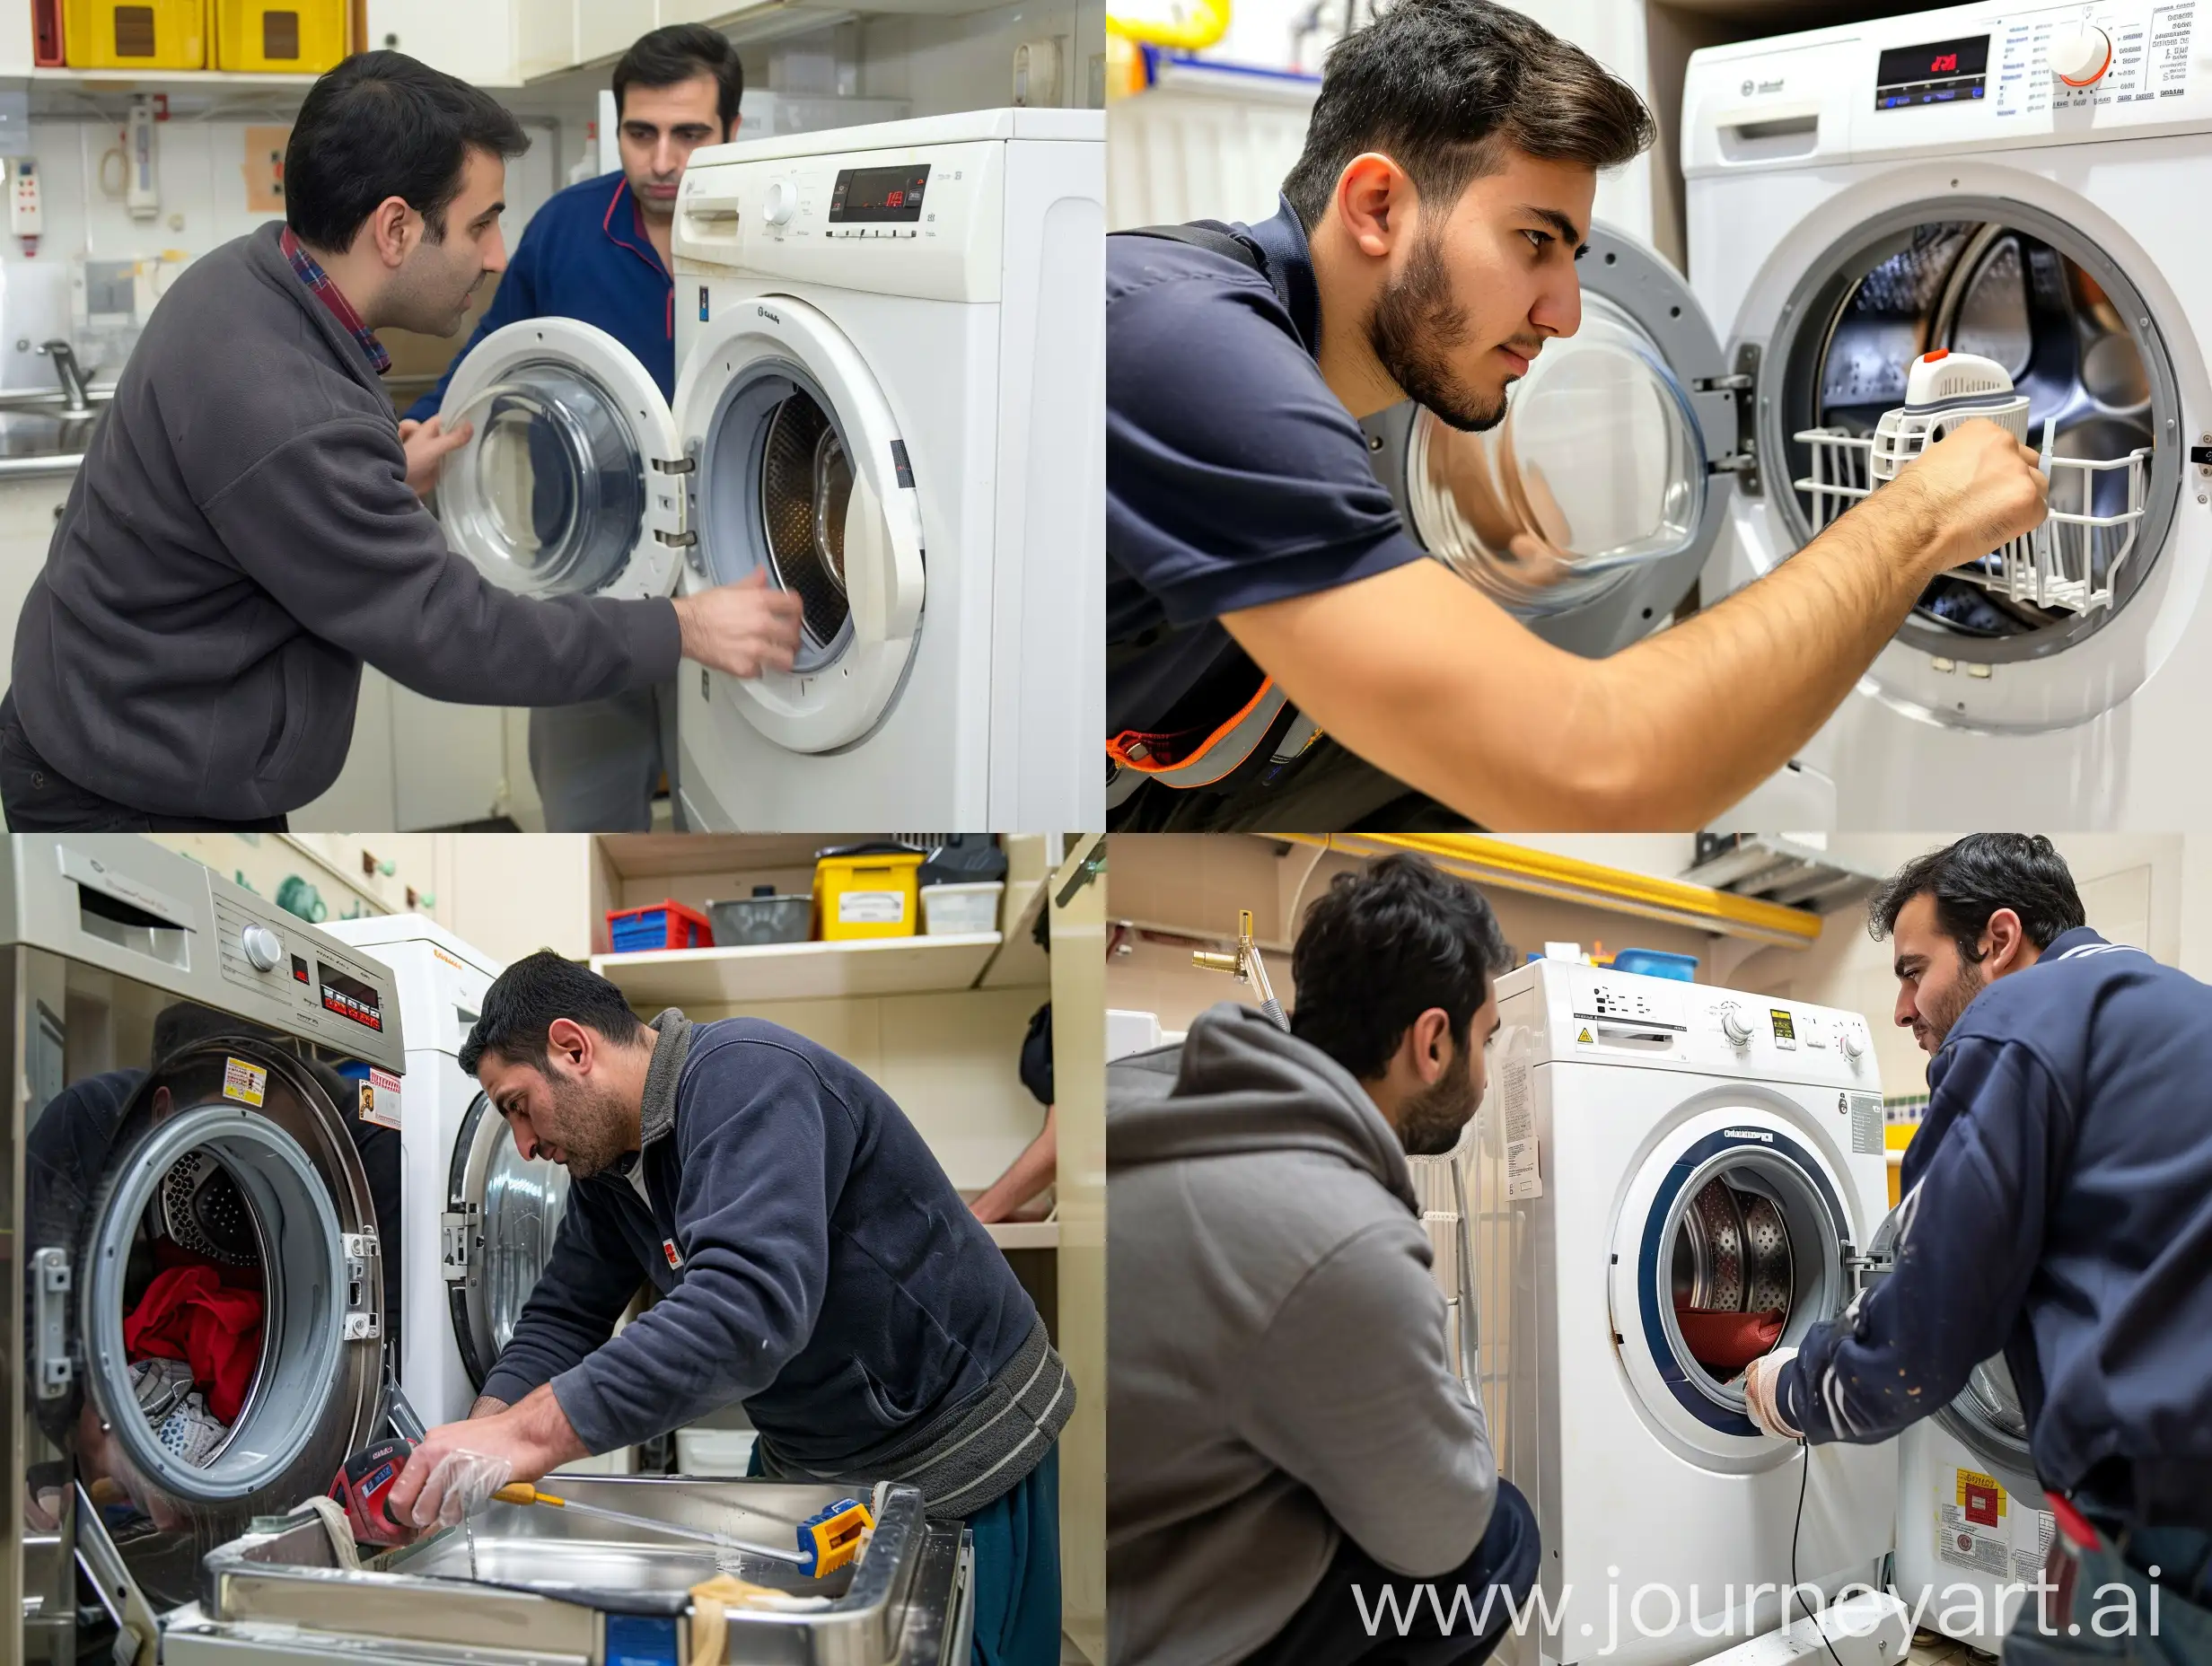 Home-Appliance-Repair-Training-in-Tehran-Students-Learning-Washing-Machine-and-Dishwasher-Repairs